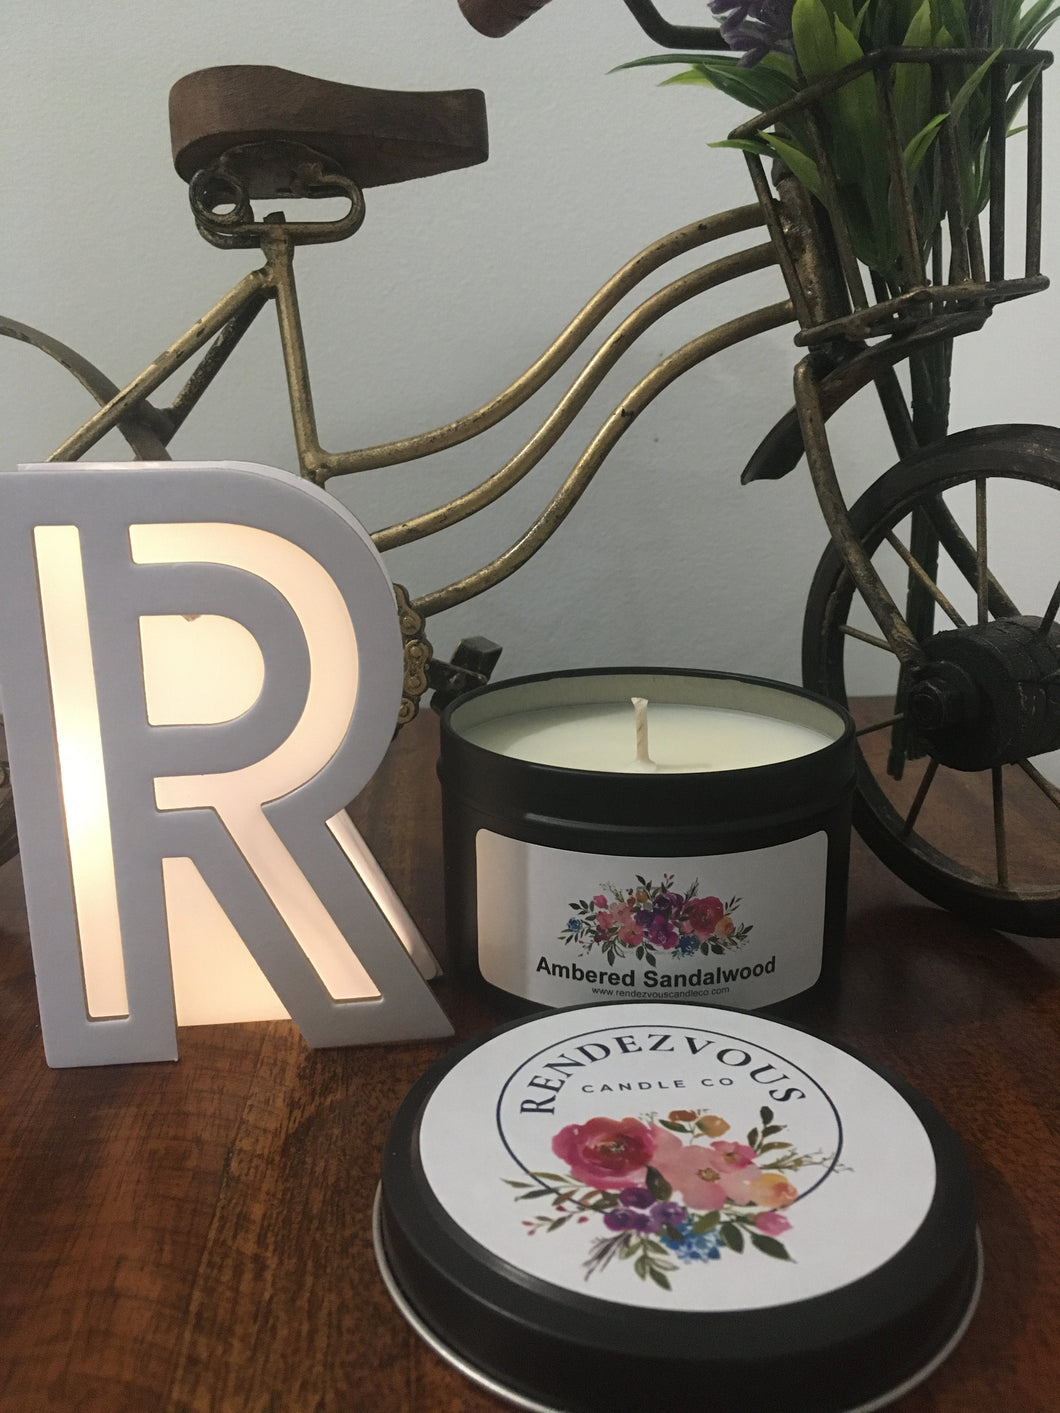 Ambered Sandalwood Scented Soy Candle